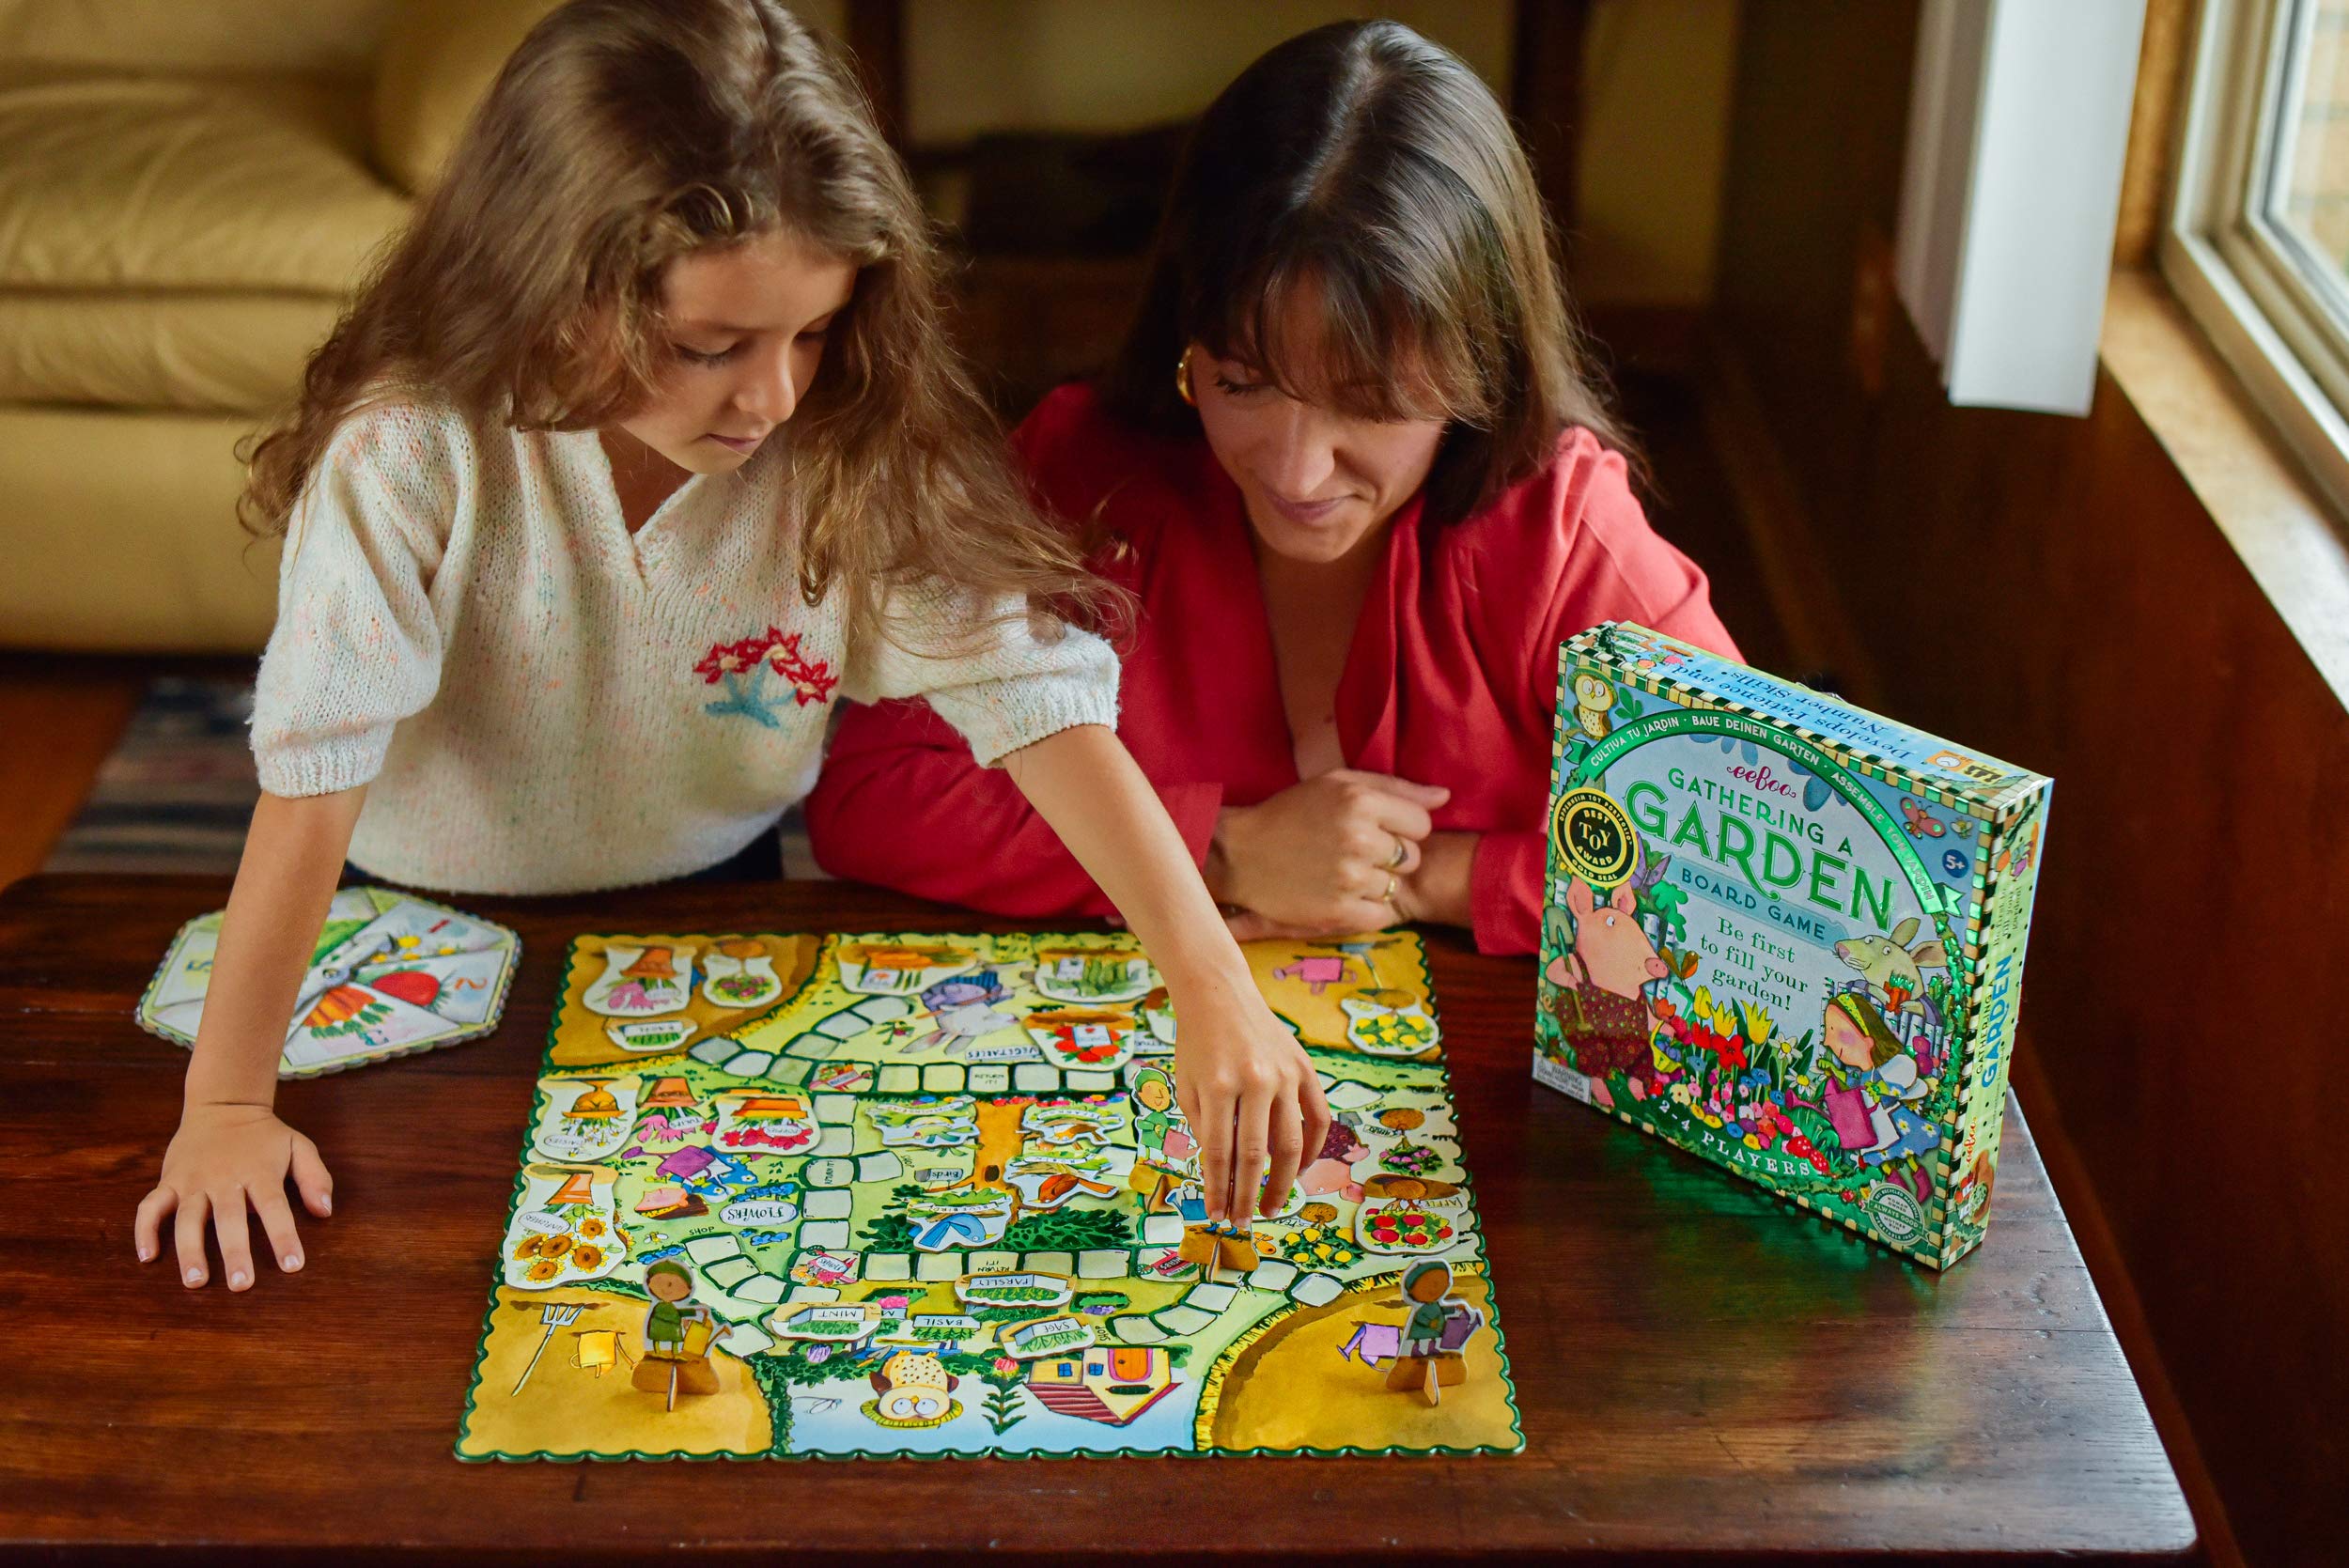 eeBoo: Gathering a Garden Board Game, Educational Games and Activities that Cultivate Conversation, Socialization, and Skill-building, 2+ players, Perfect for Ages 5 and up